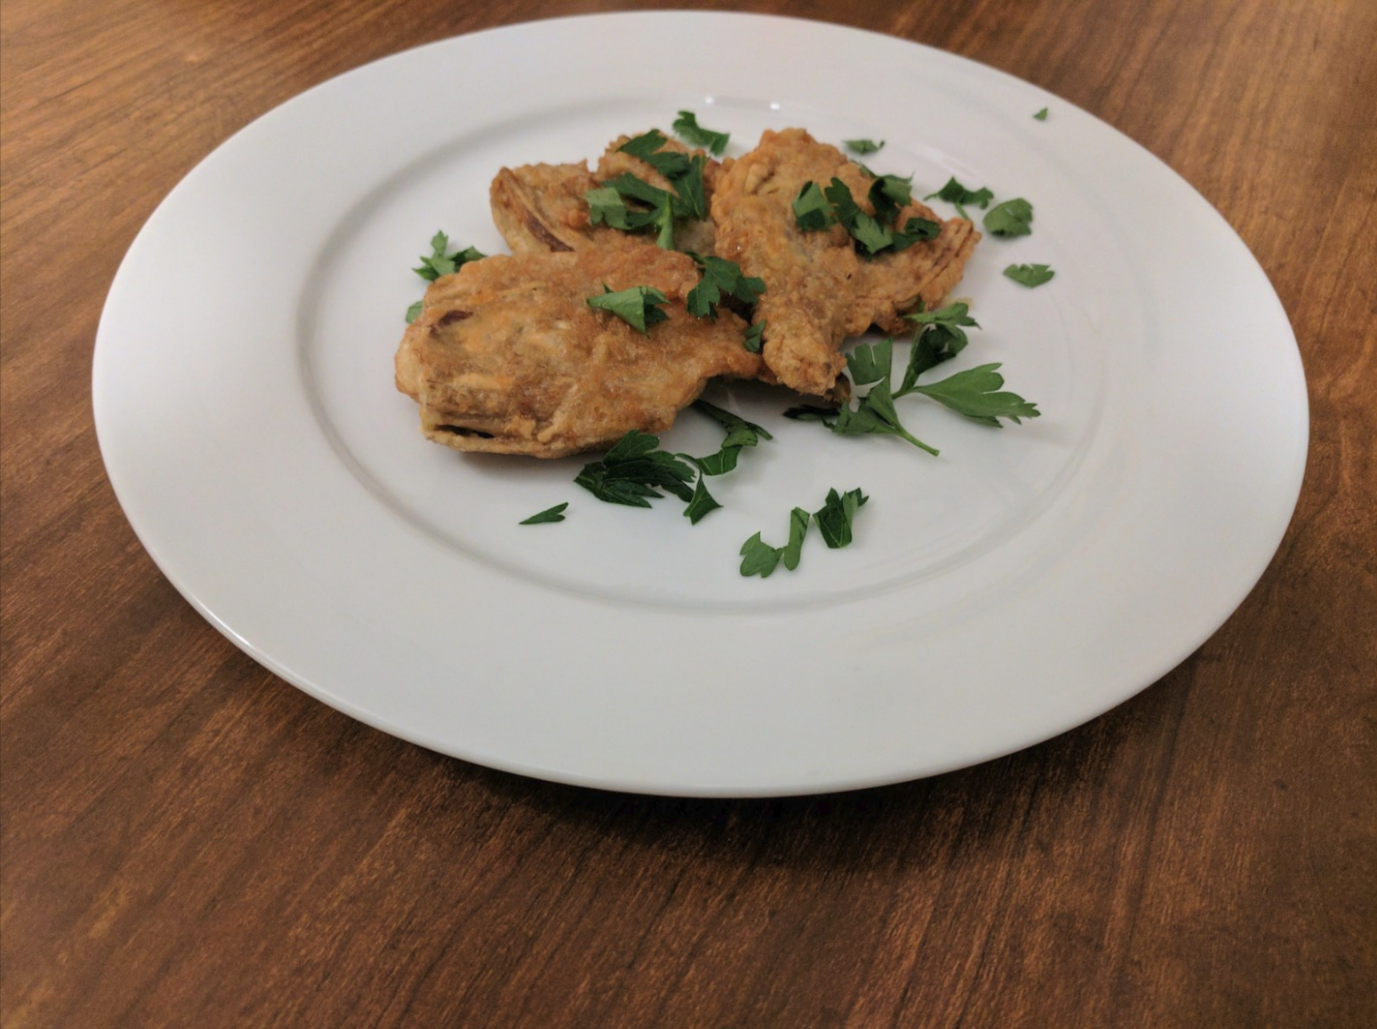 Fried artichokes - a "must" for Easter